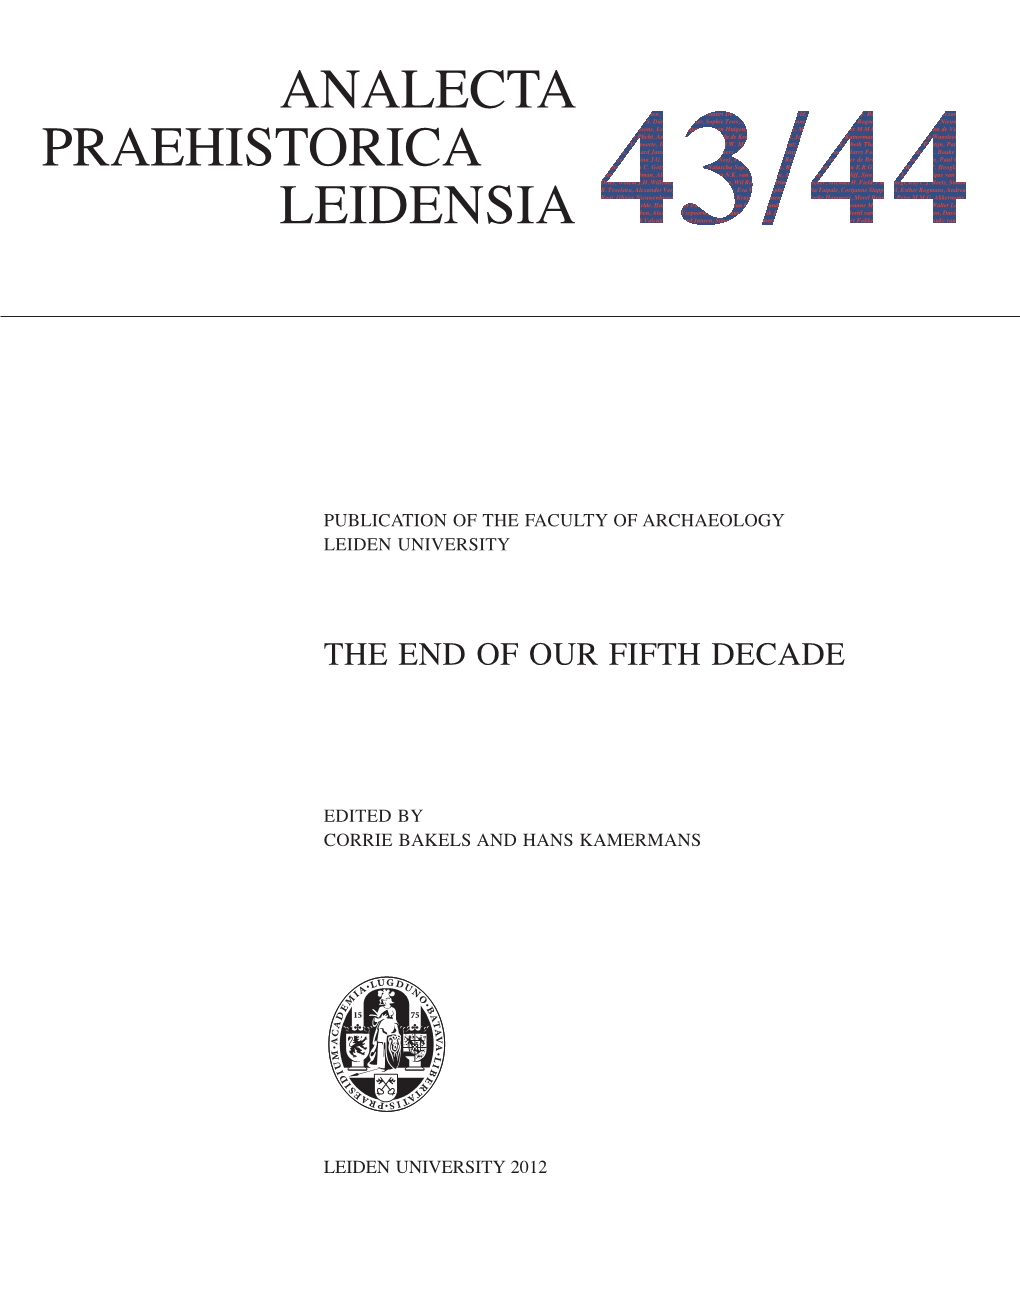 Analecta Praehistorica Leidensia and Single Volumes Can Be Ordered At